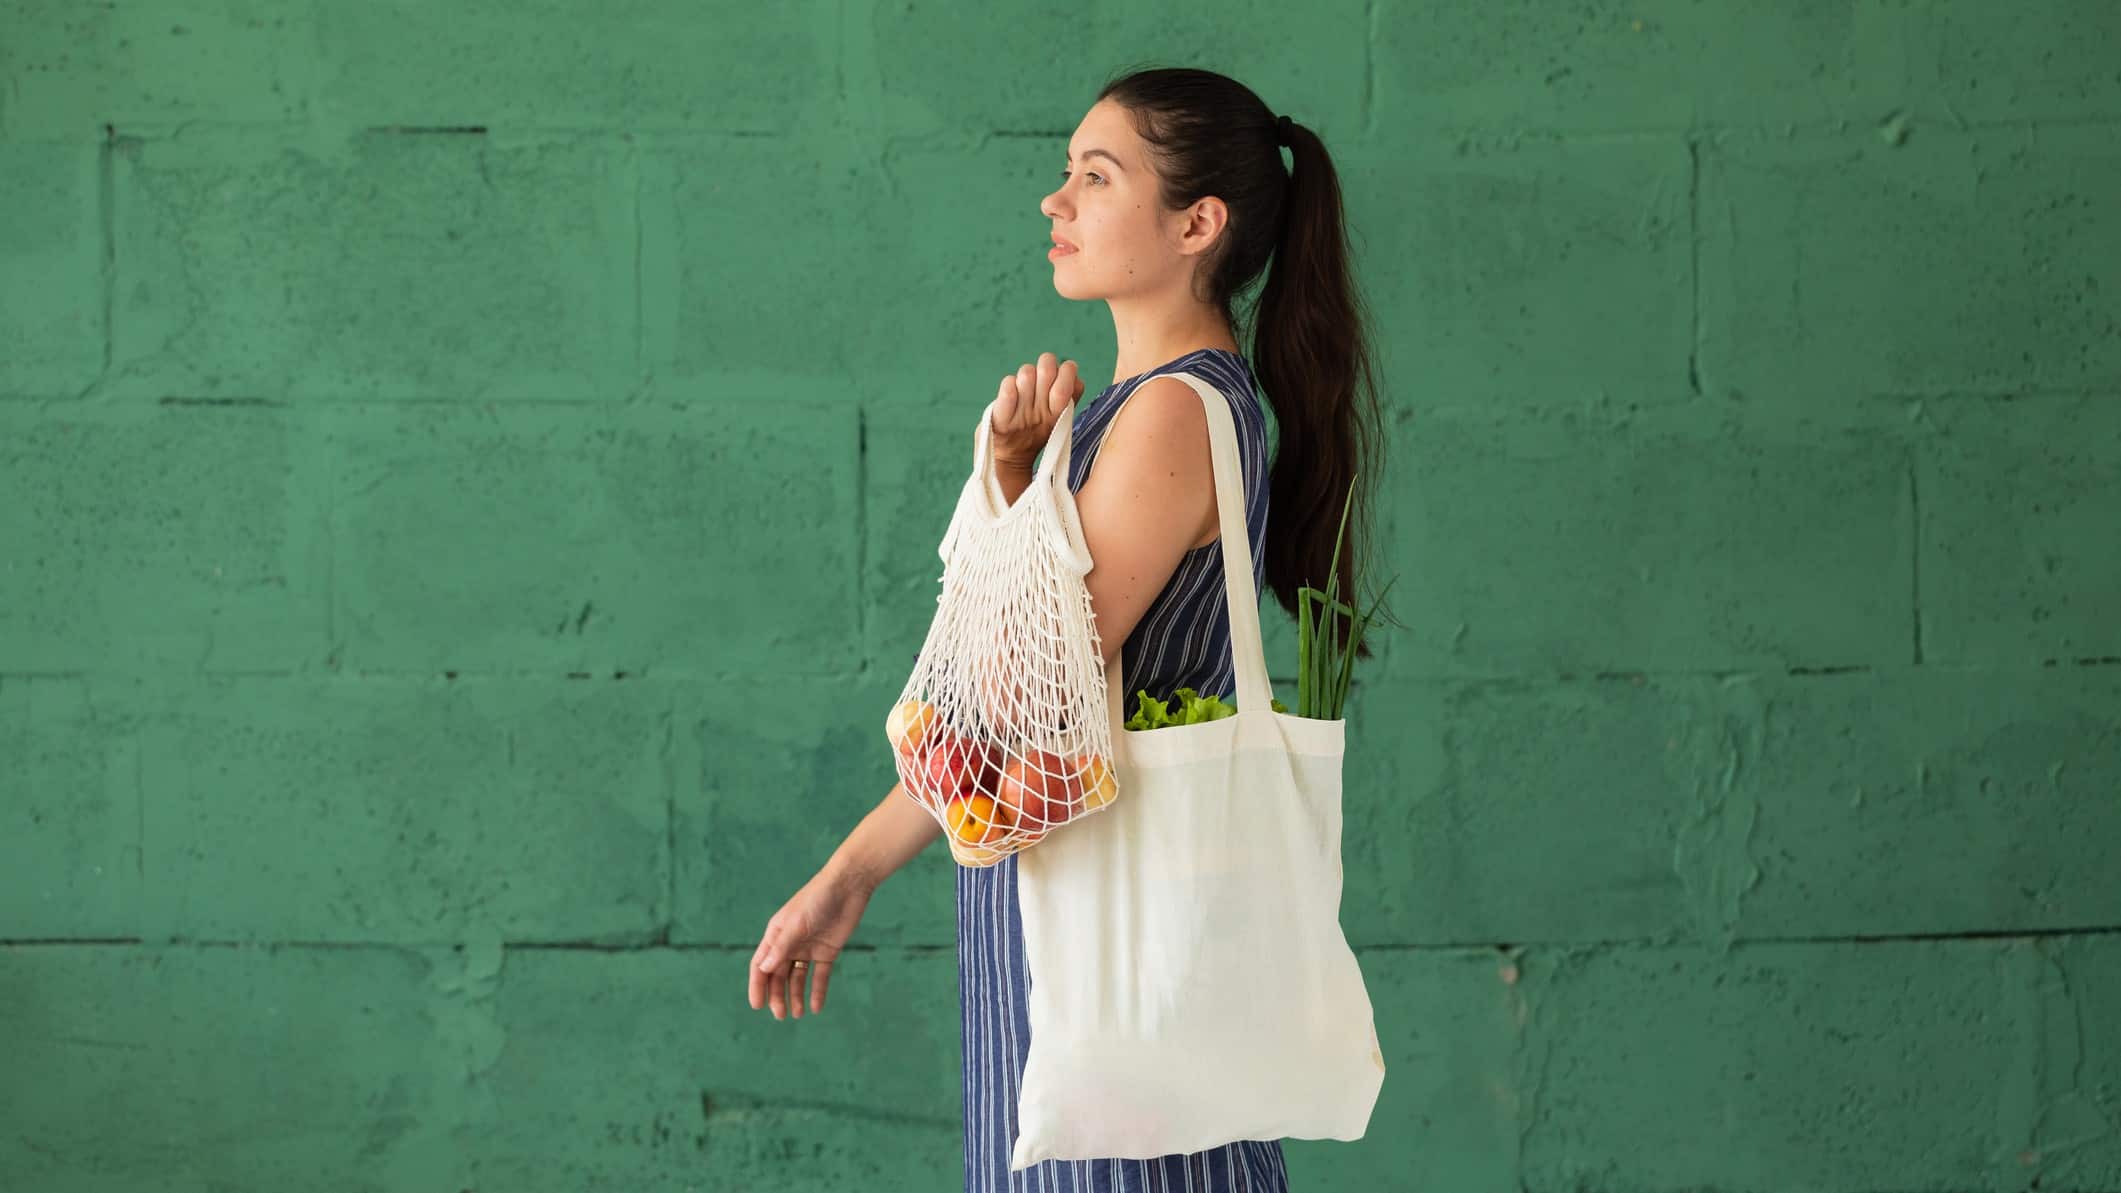 A woman carrying produce in recyclable shopping bags walks past a green wall, indicating consumer preference for sustainableretail